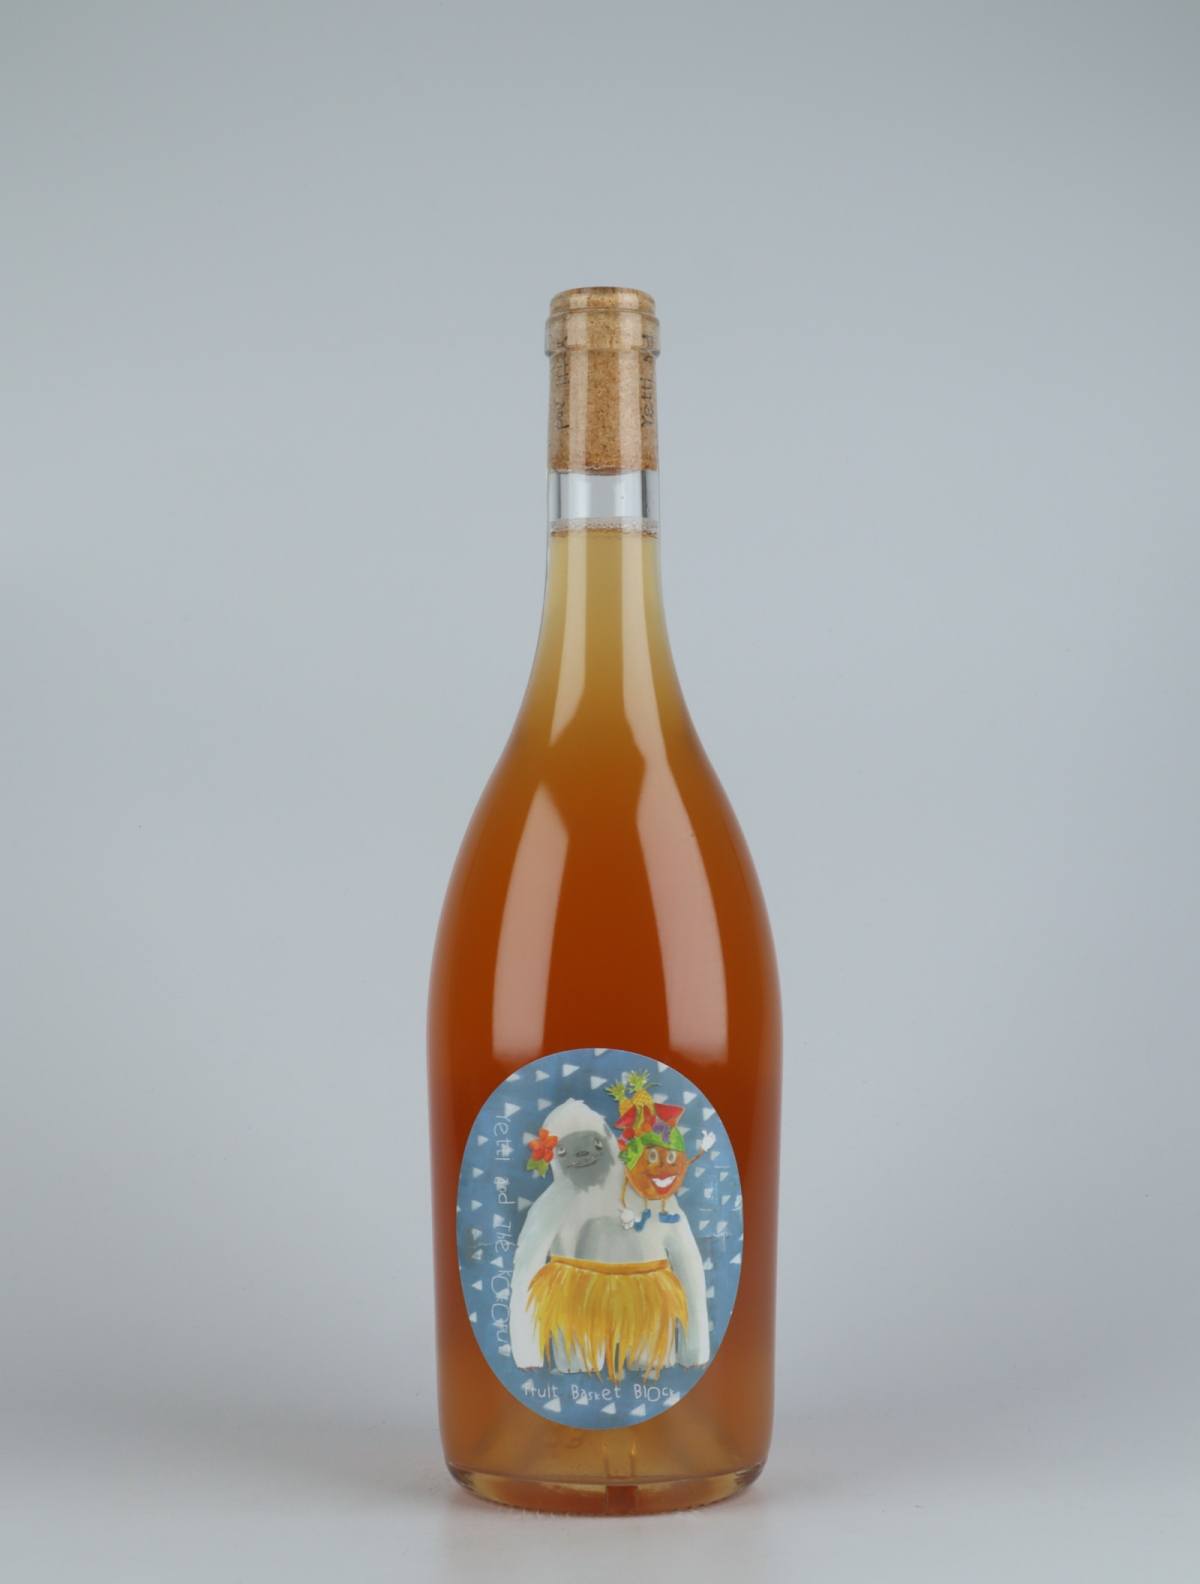 A bottle 2020 Fruit Basket White wine from Yetti and the Kokonut, Adelaide Hills in 